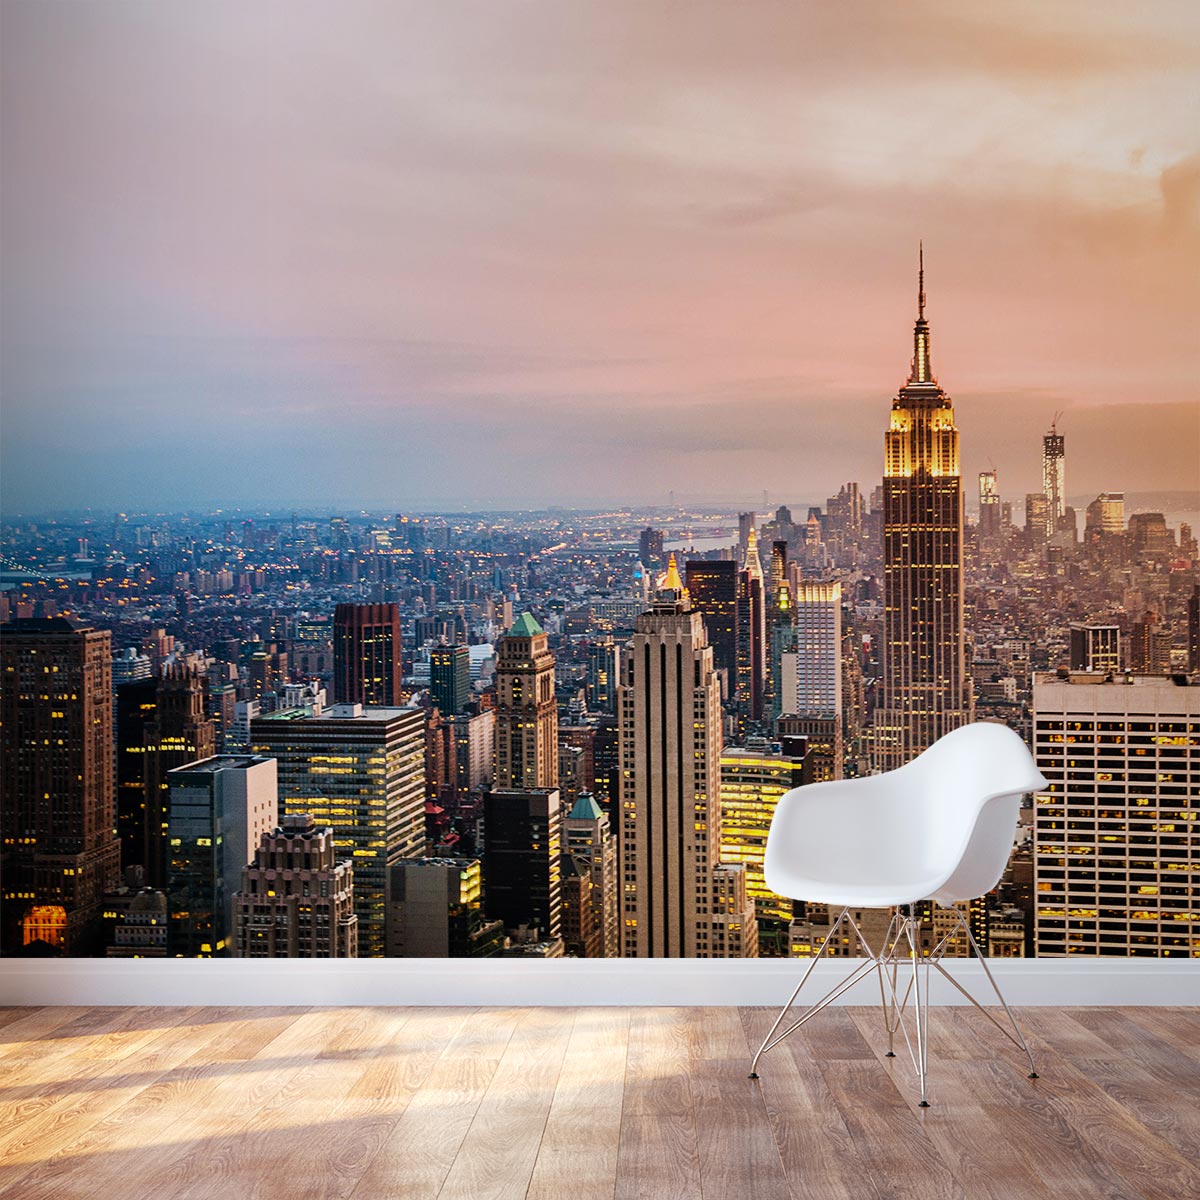 New York Skyline Wall Mural These Removable Wallpaper Panels Are